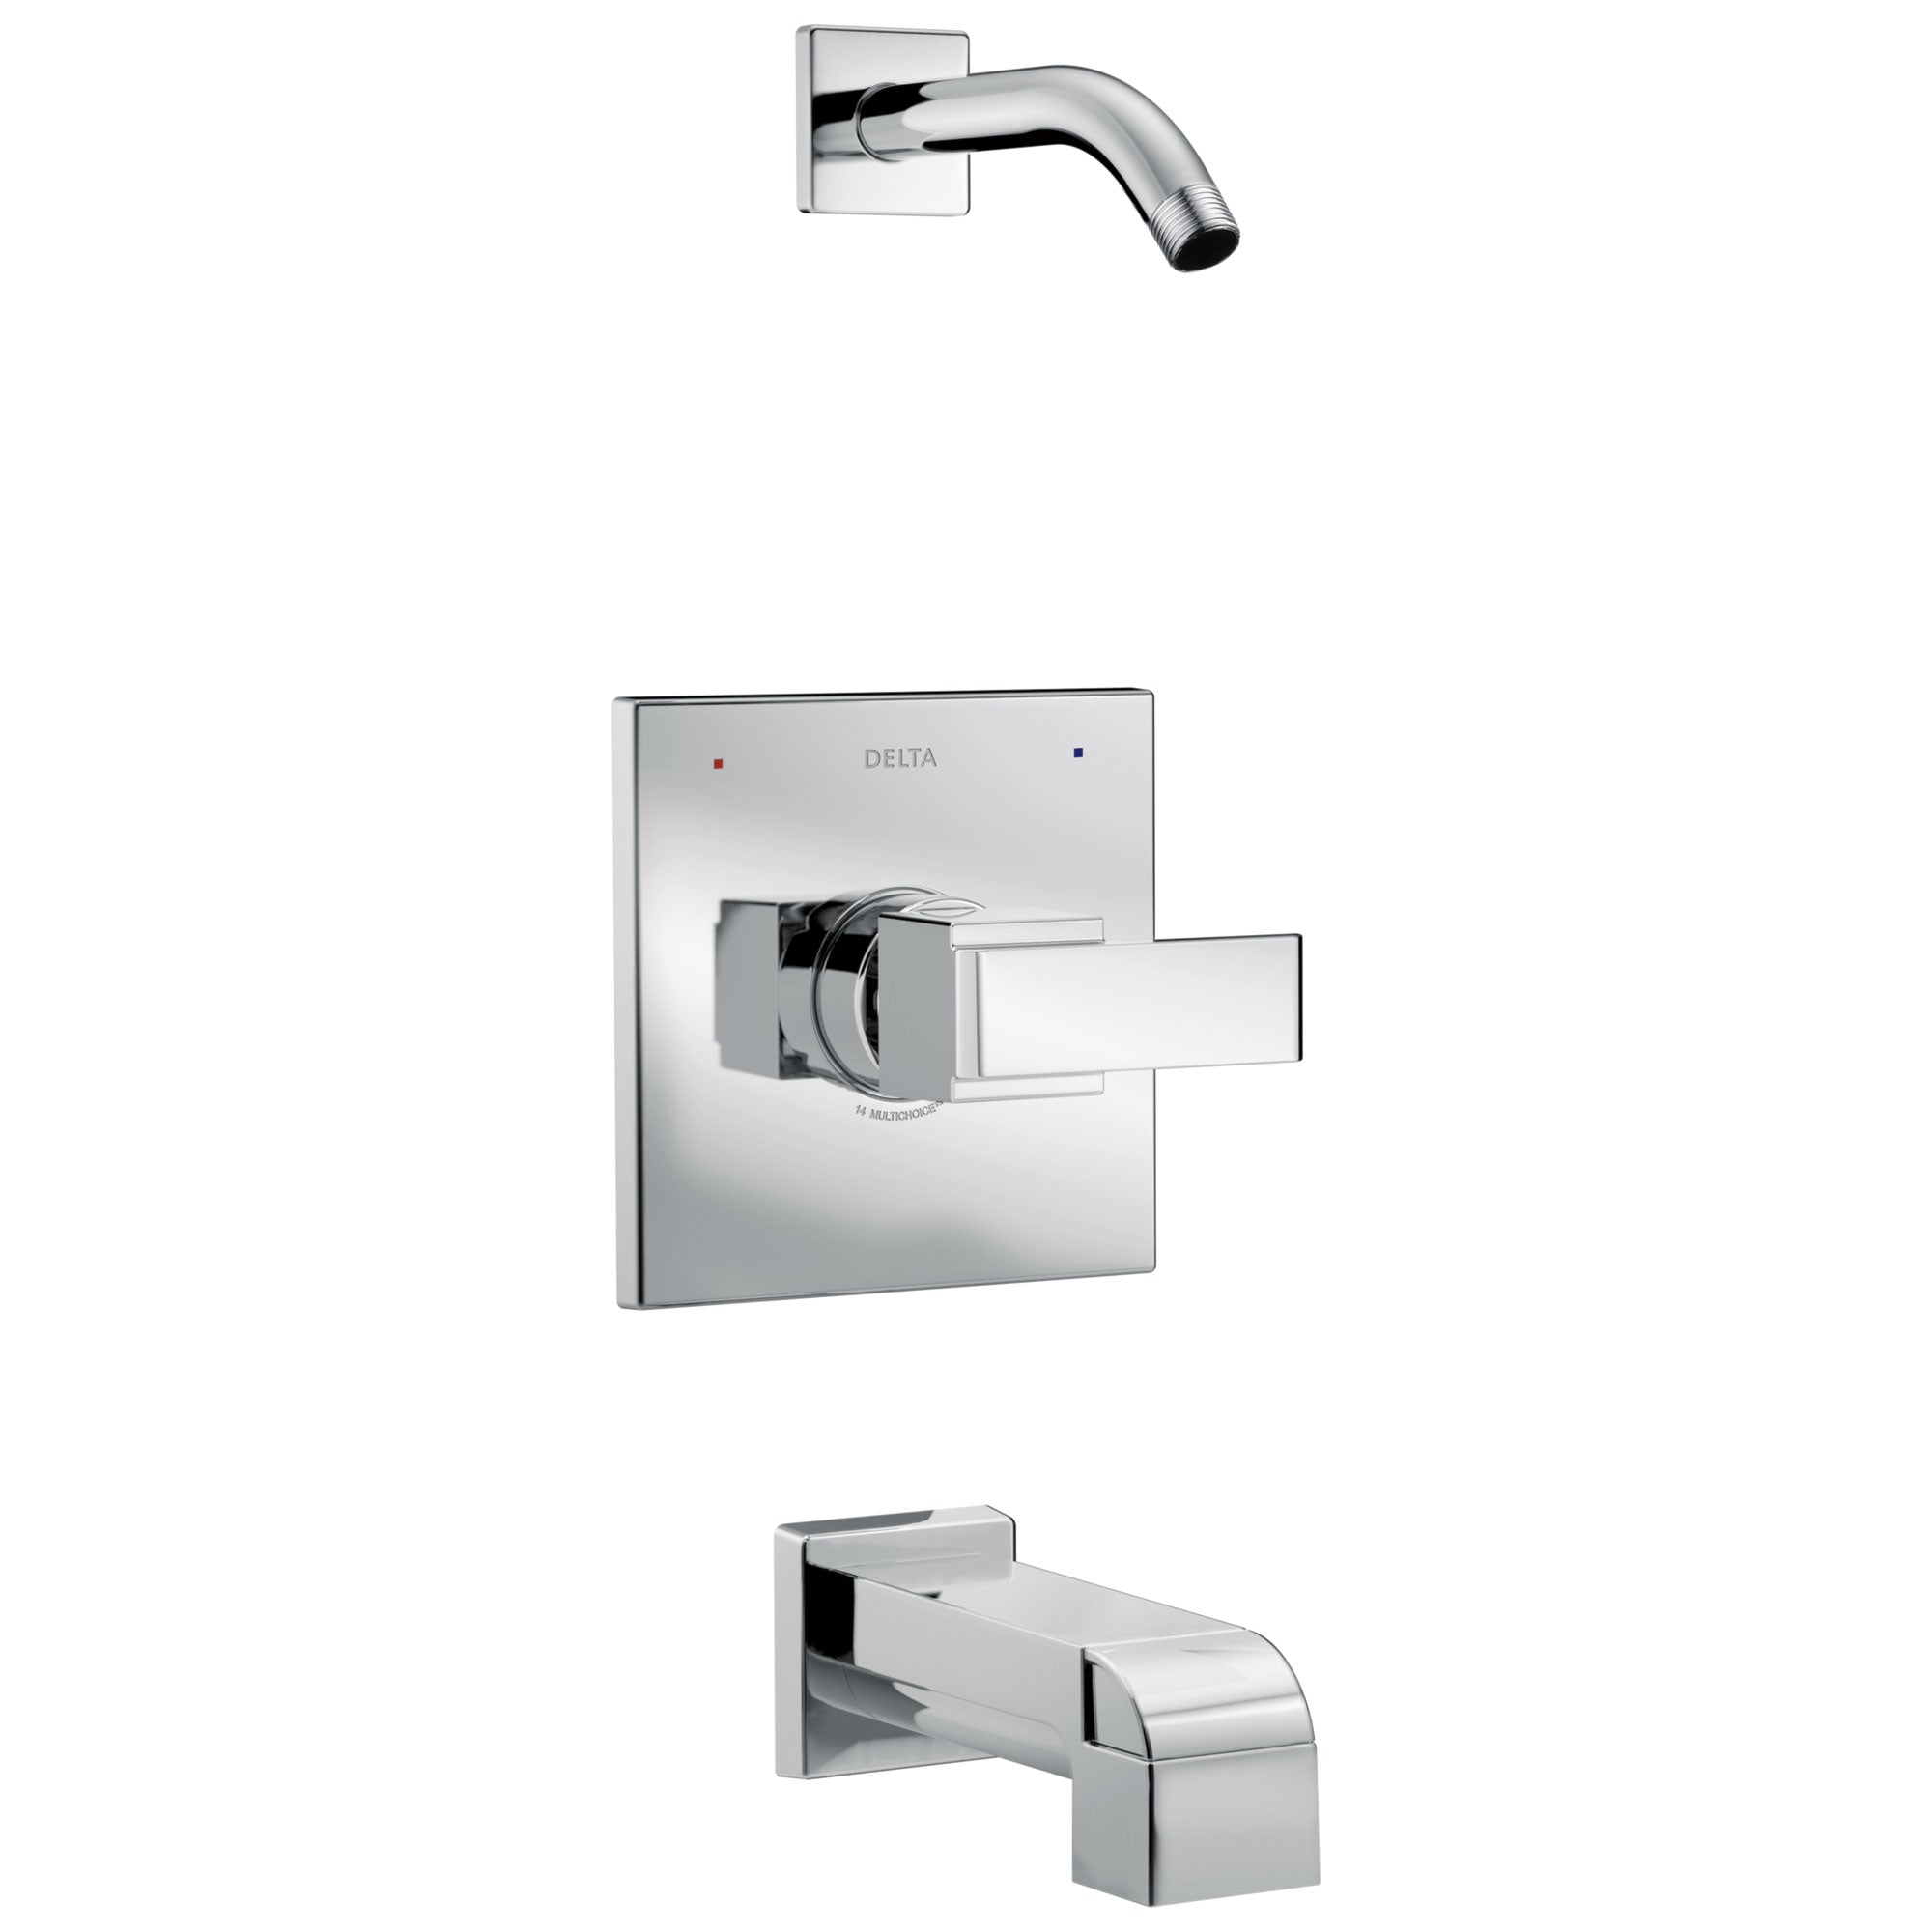 Delta Ara Collection Chrome Monitor 14 Series Modern Square Tub and Shower Combination Faucet - Less Showerhead Includes Trim Kit Rough Valve with Stops D2380V